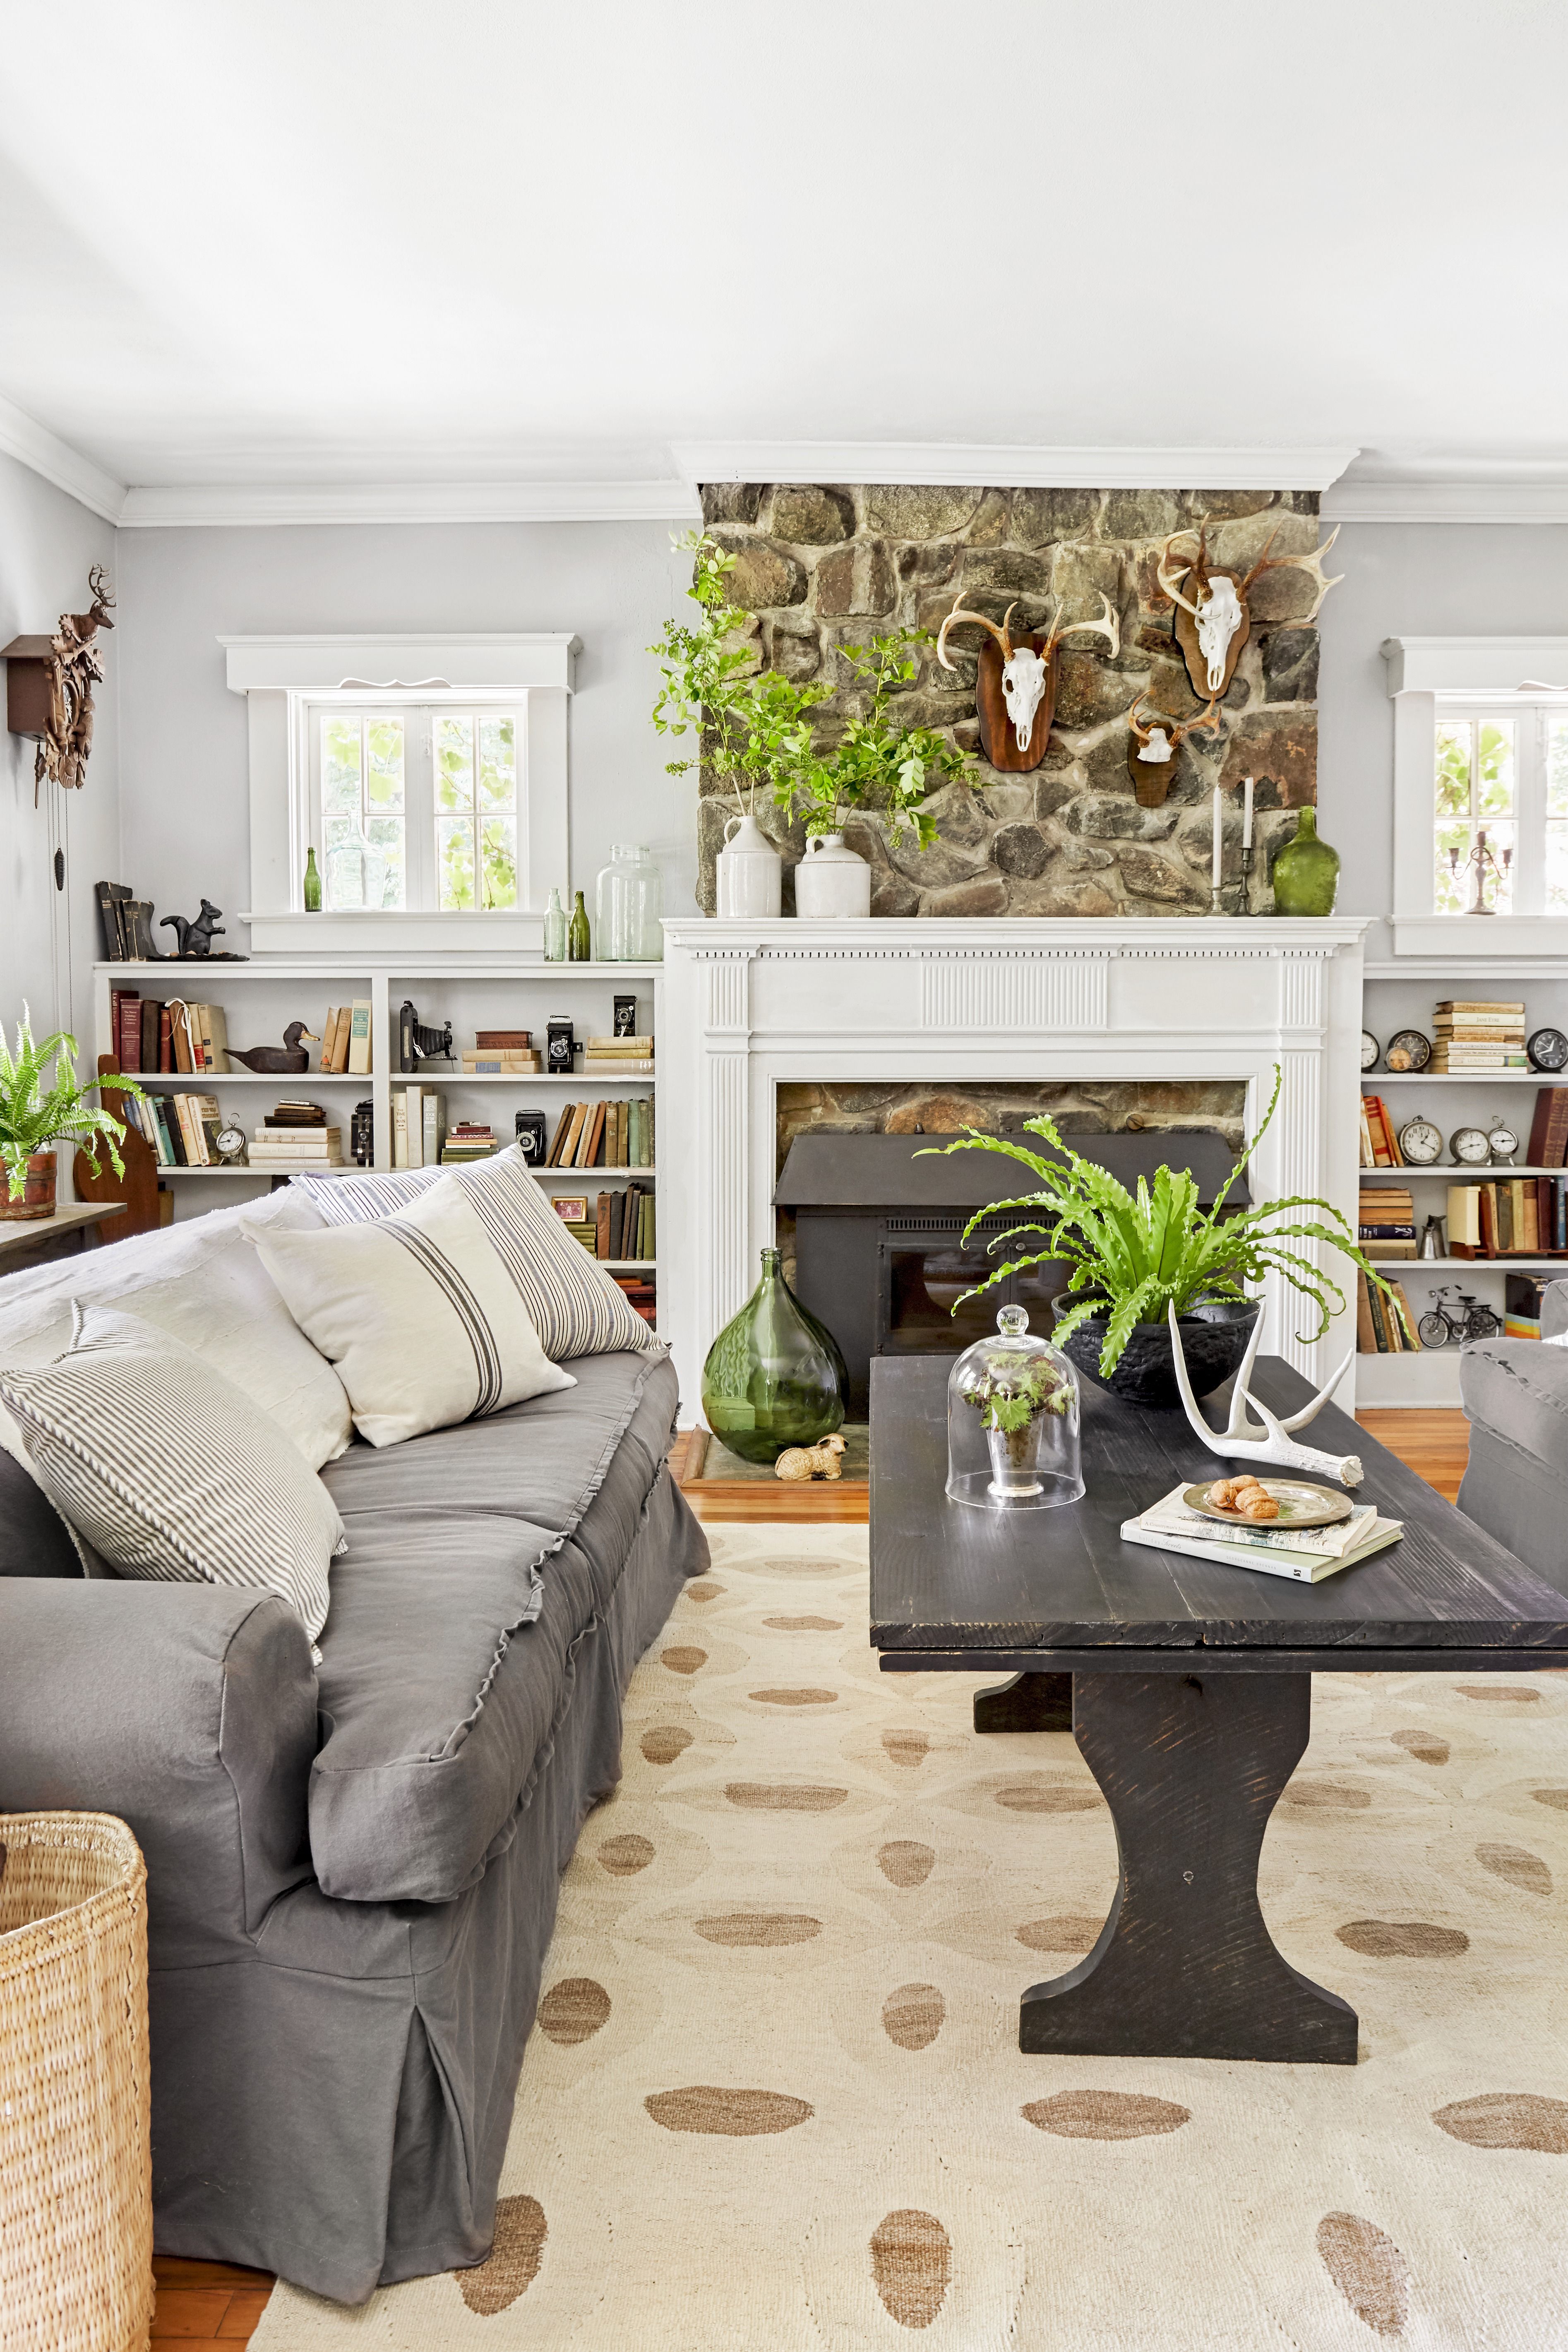 Bring Warmth Into Your Home With These Cozy Living Room Ideas